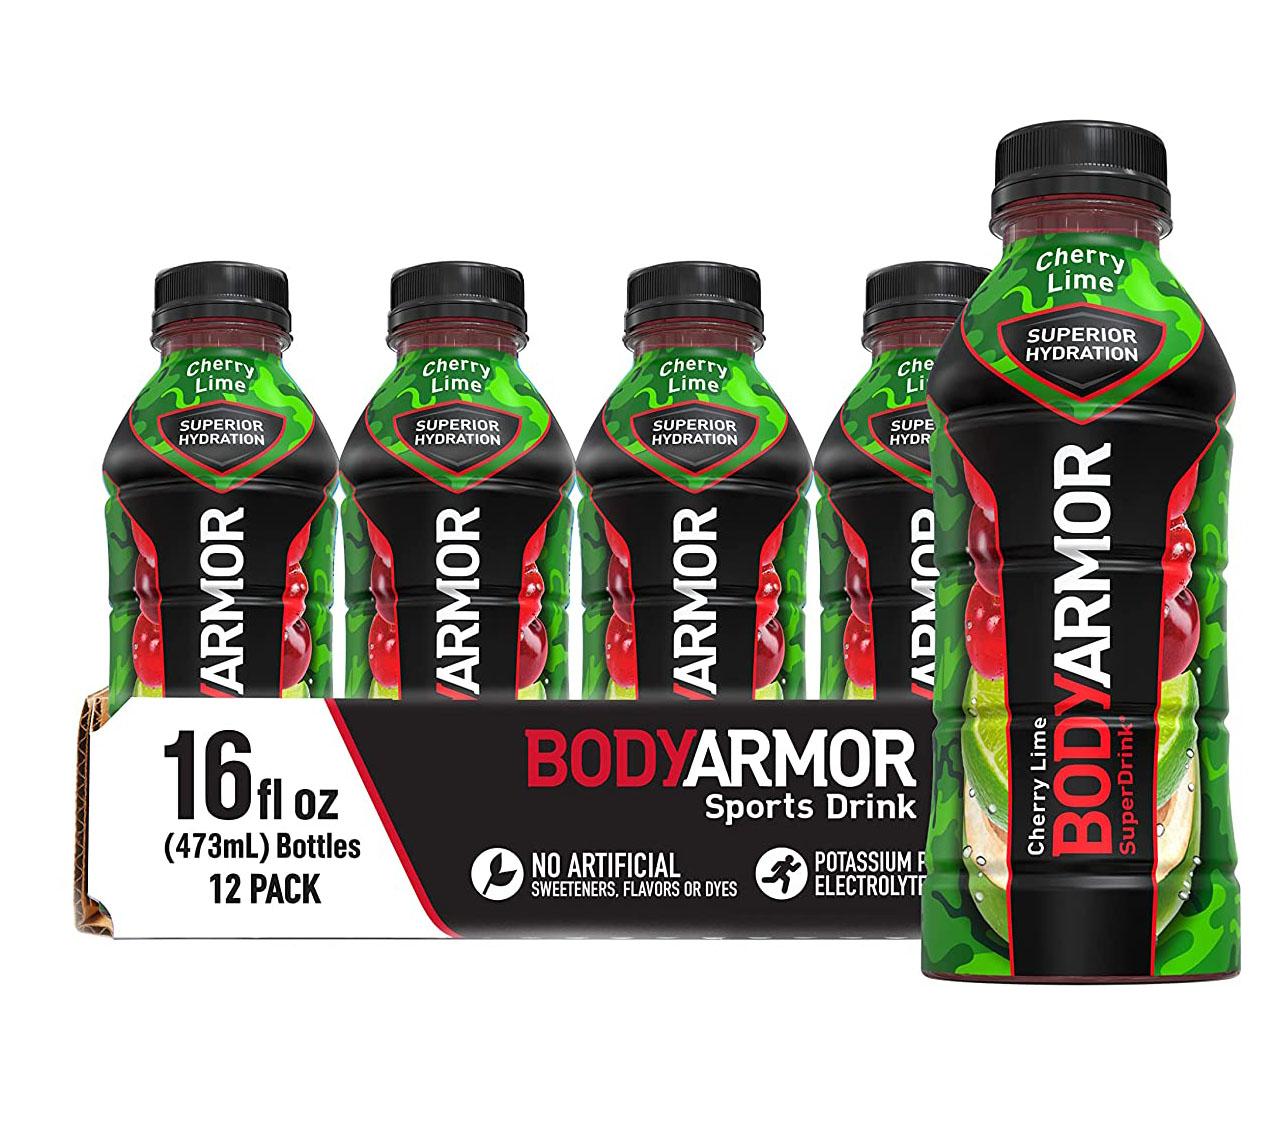 BodyArmor Sports Drink Cherry Lime 12 Pack for $11.40 Shipped